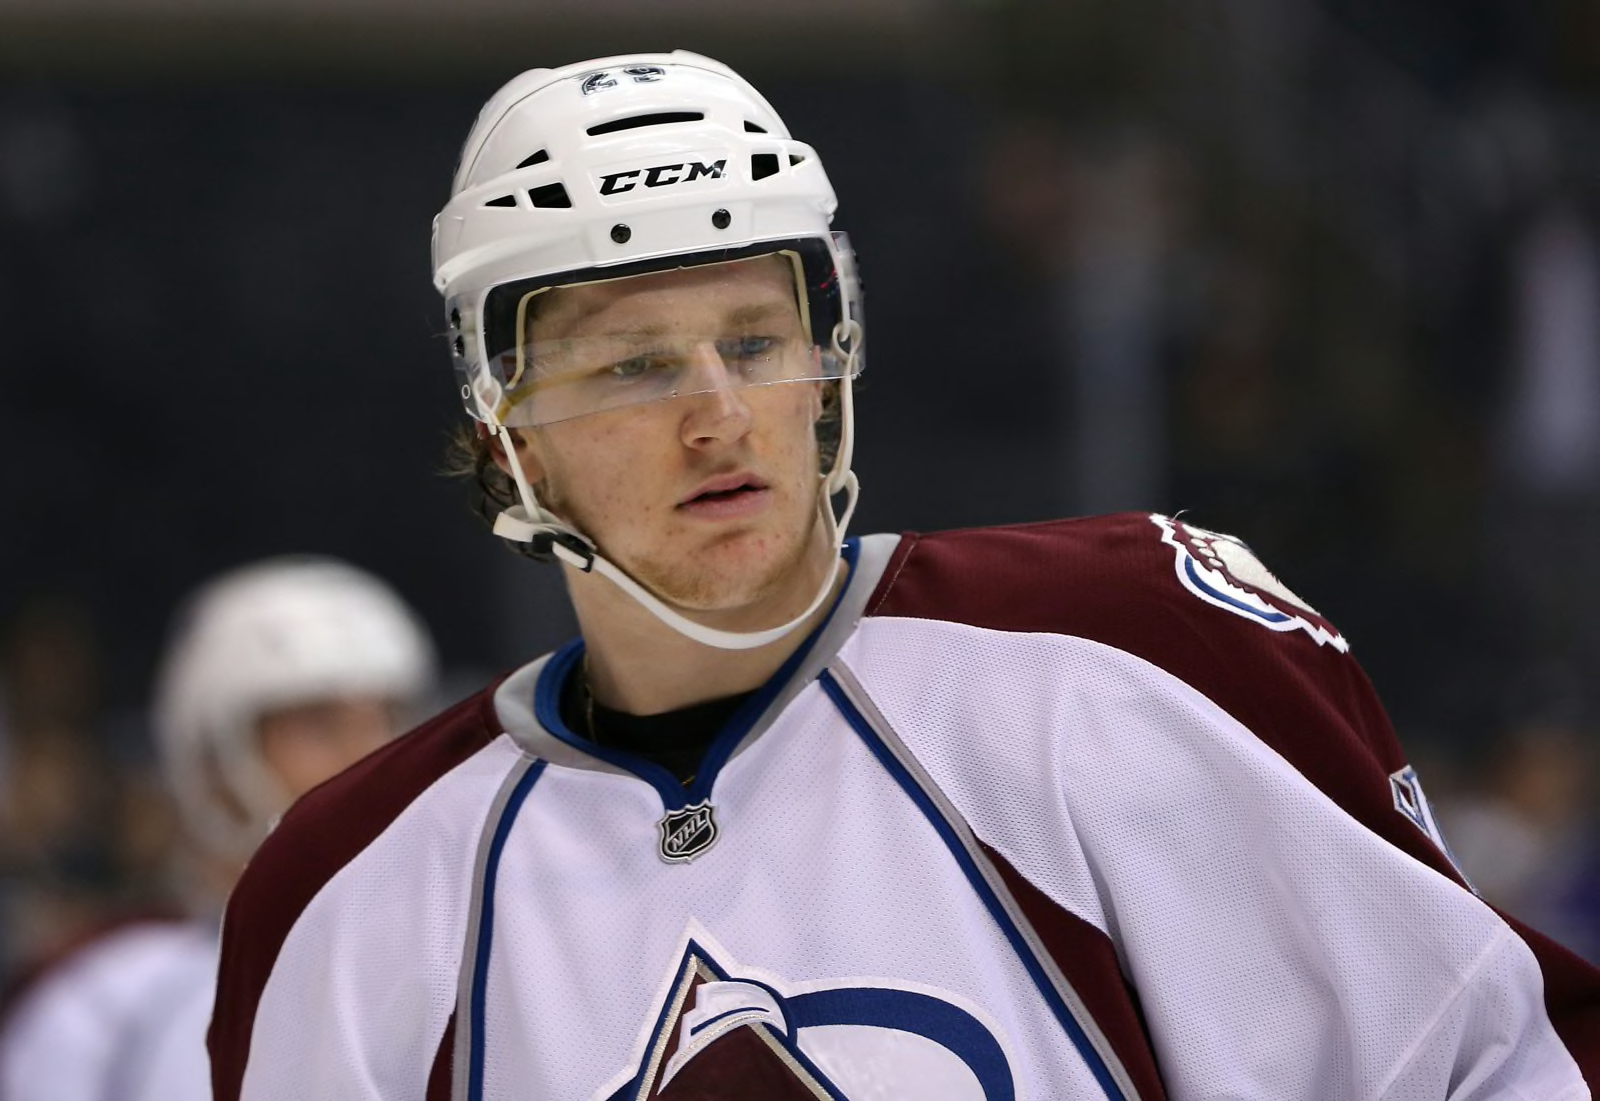 How old is NHL star Nathan MacKinnon?